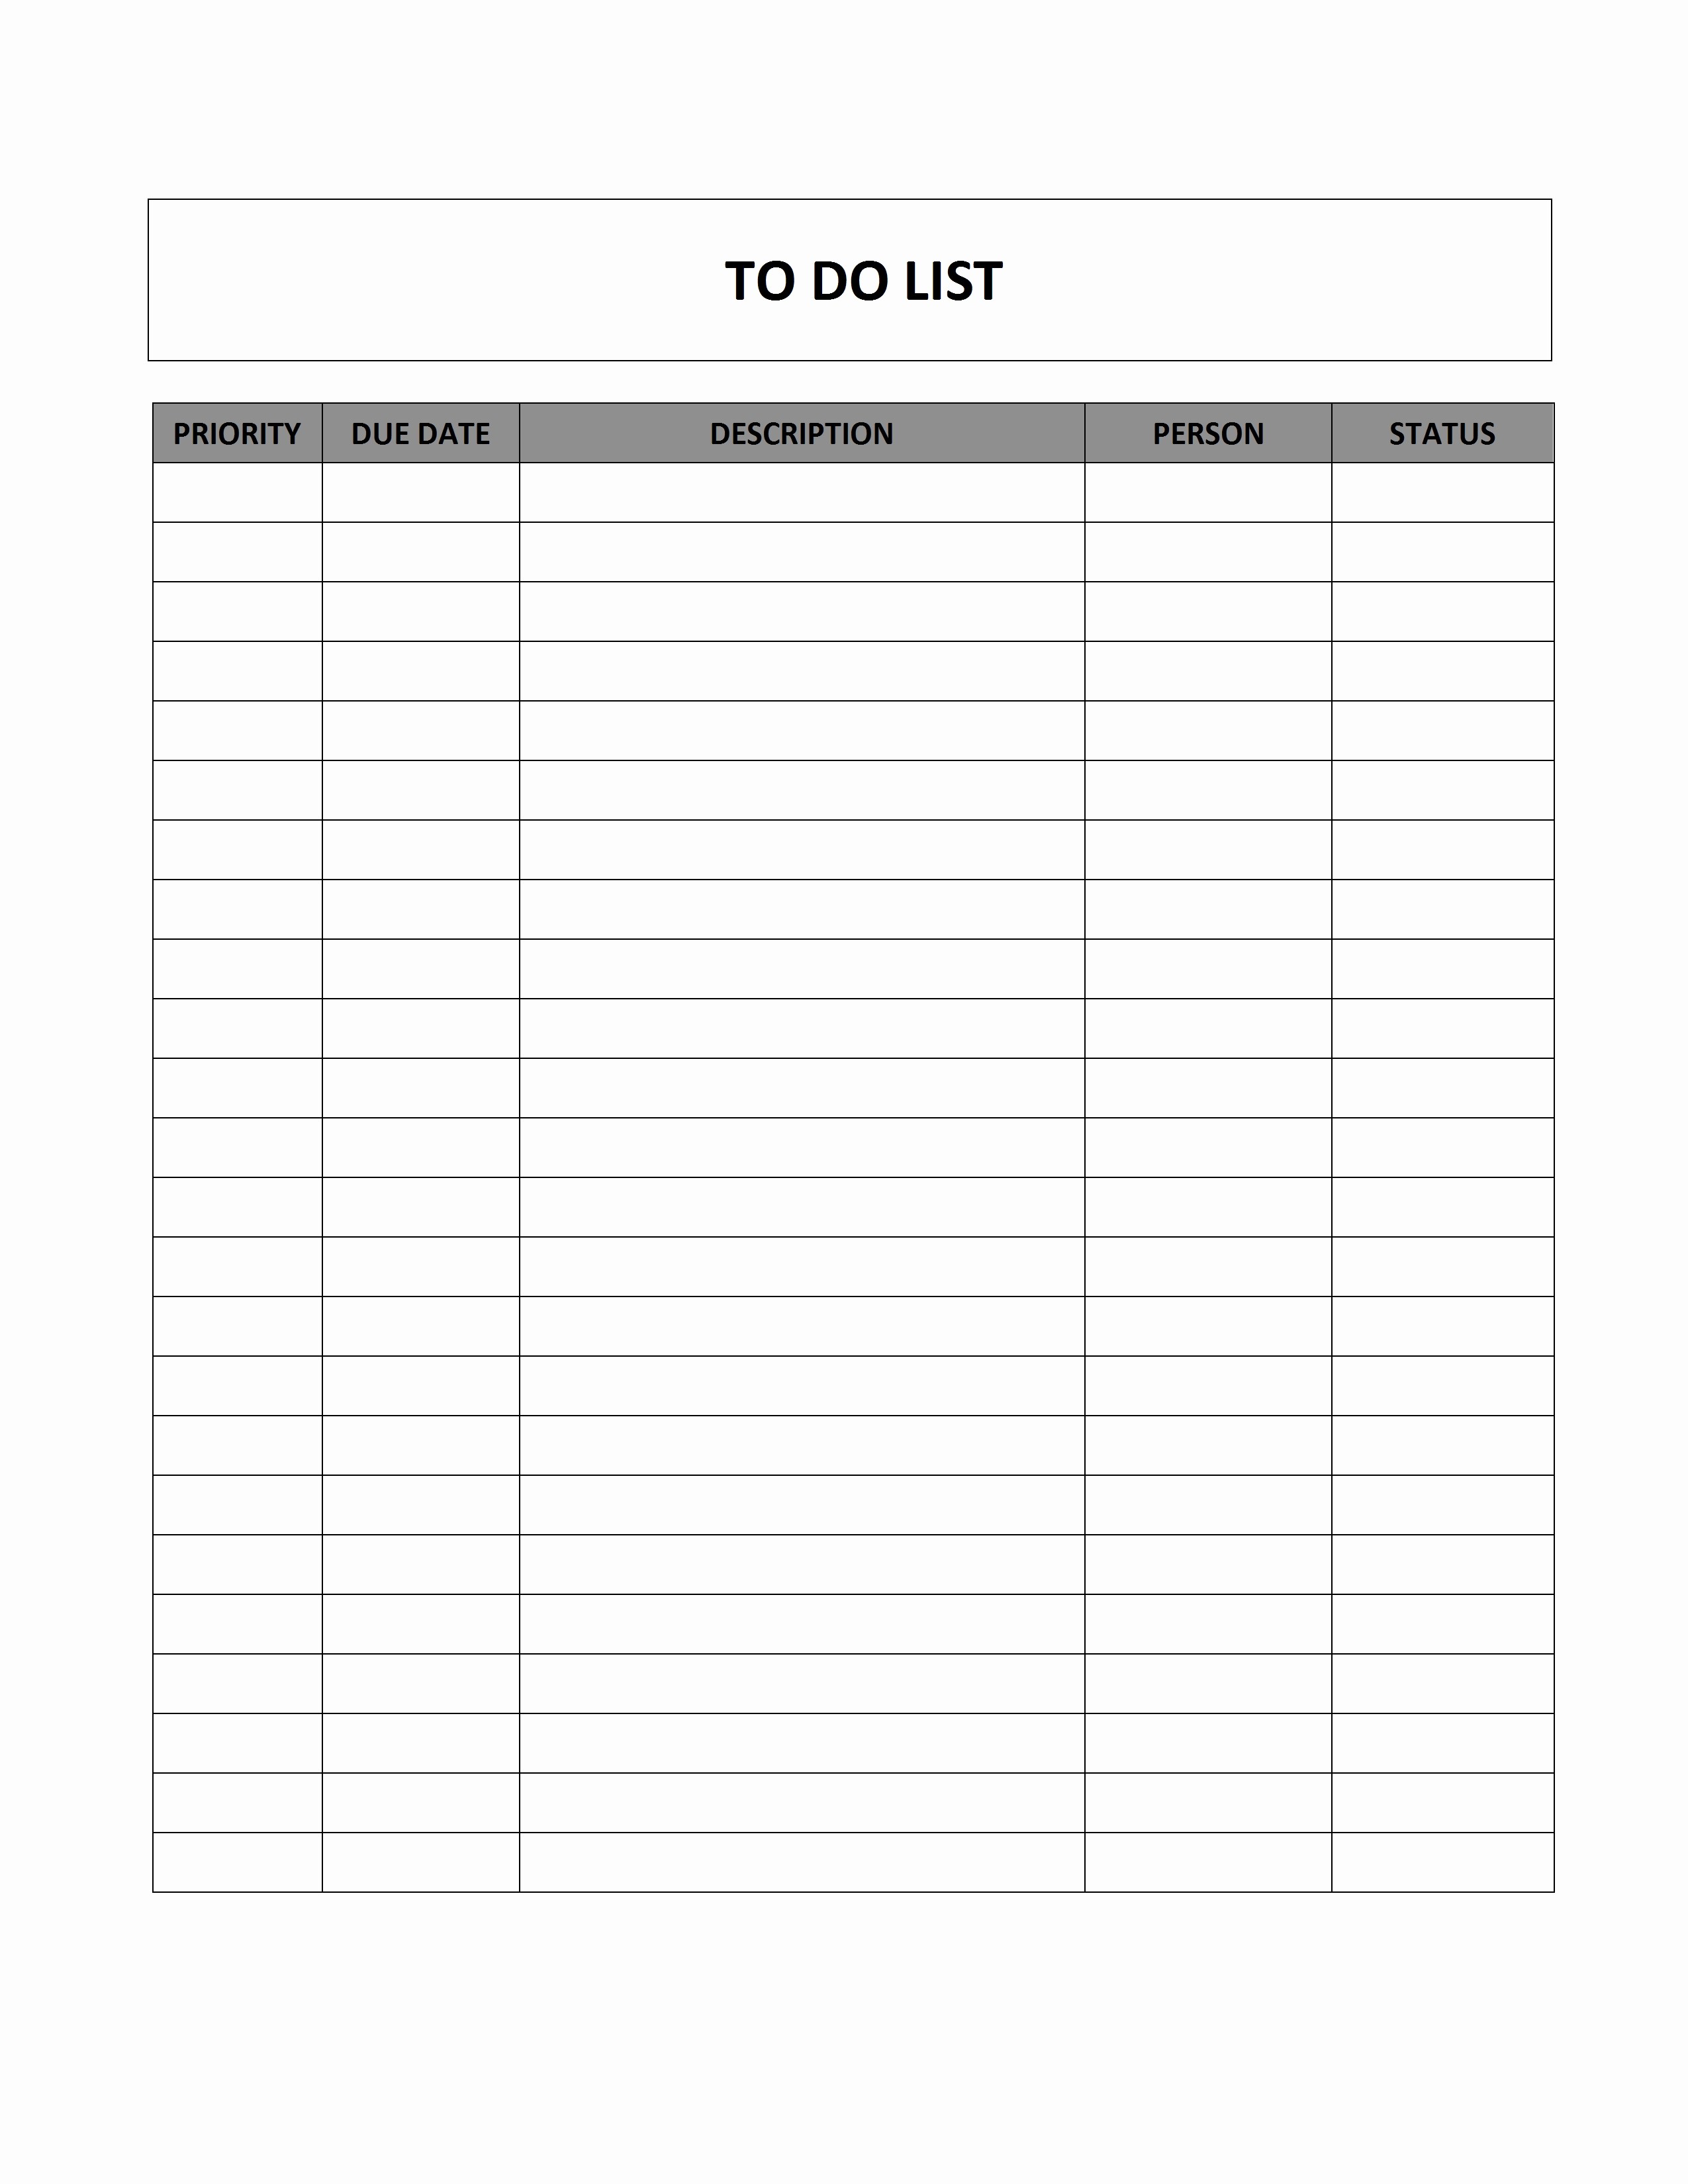 Office to Do List Template Elegant to Do List Template